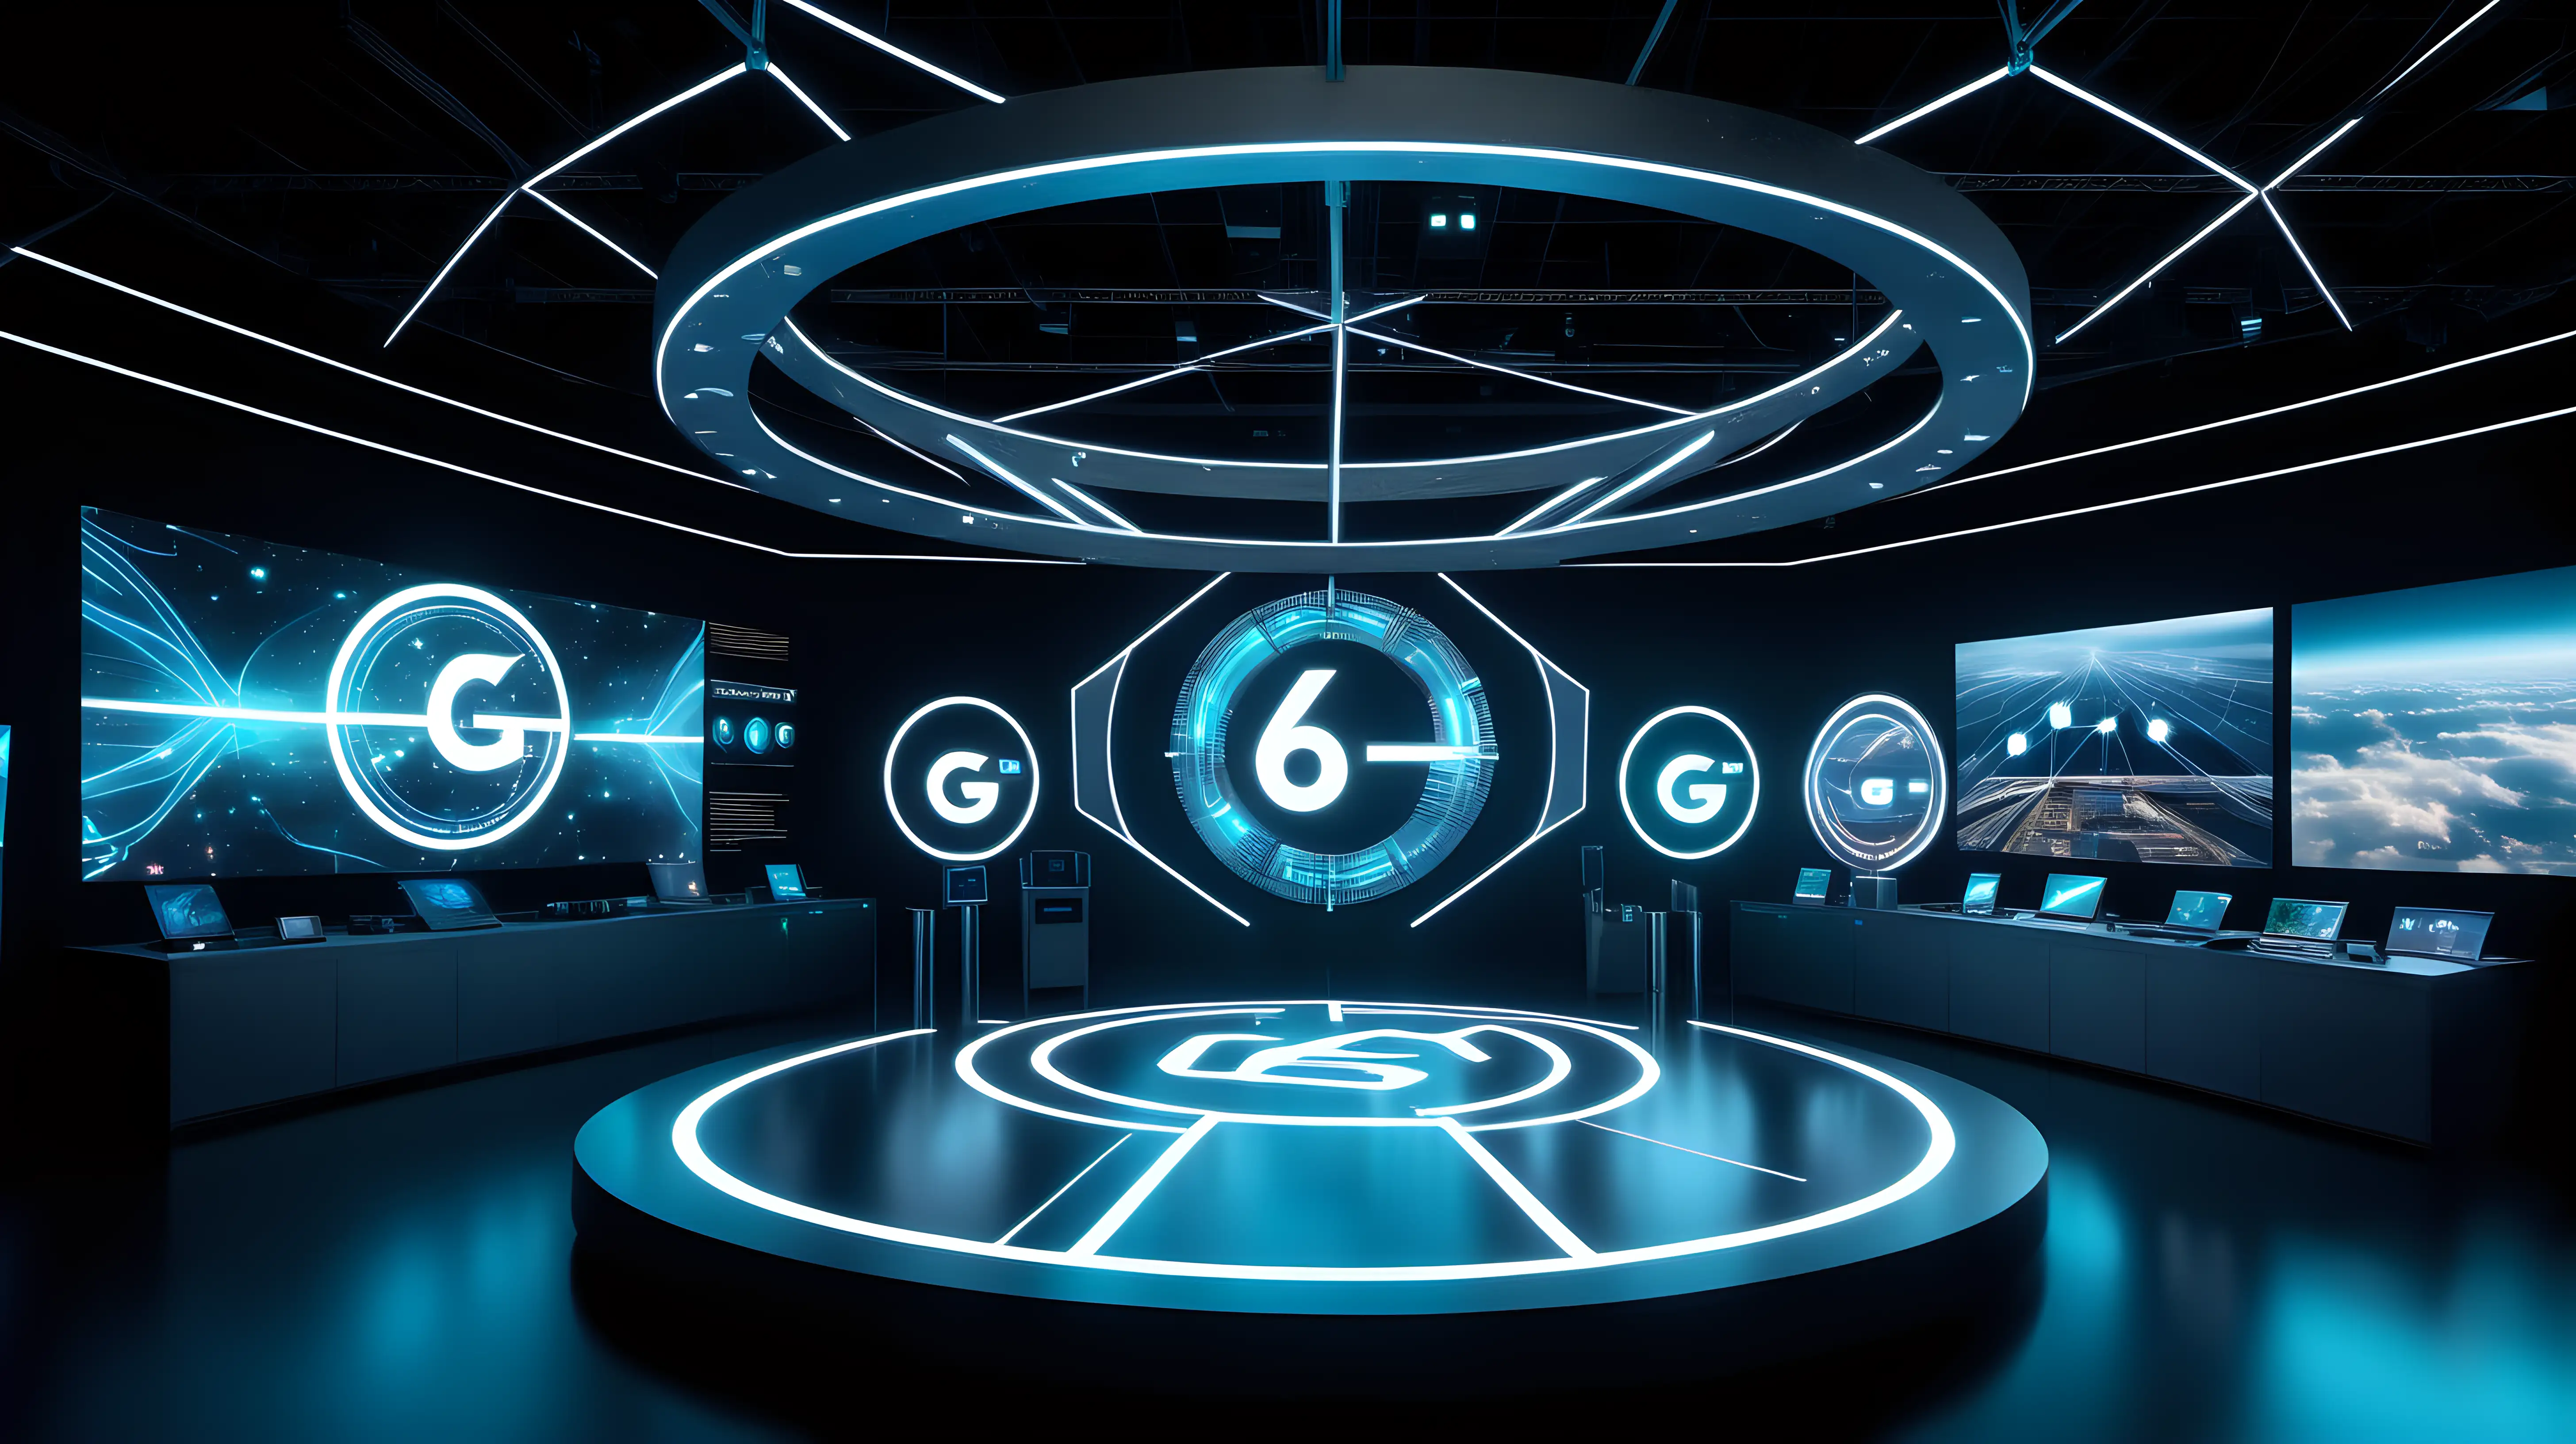 Futuristic 6G Communication Hub with Holographic Displays and Drones